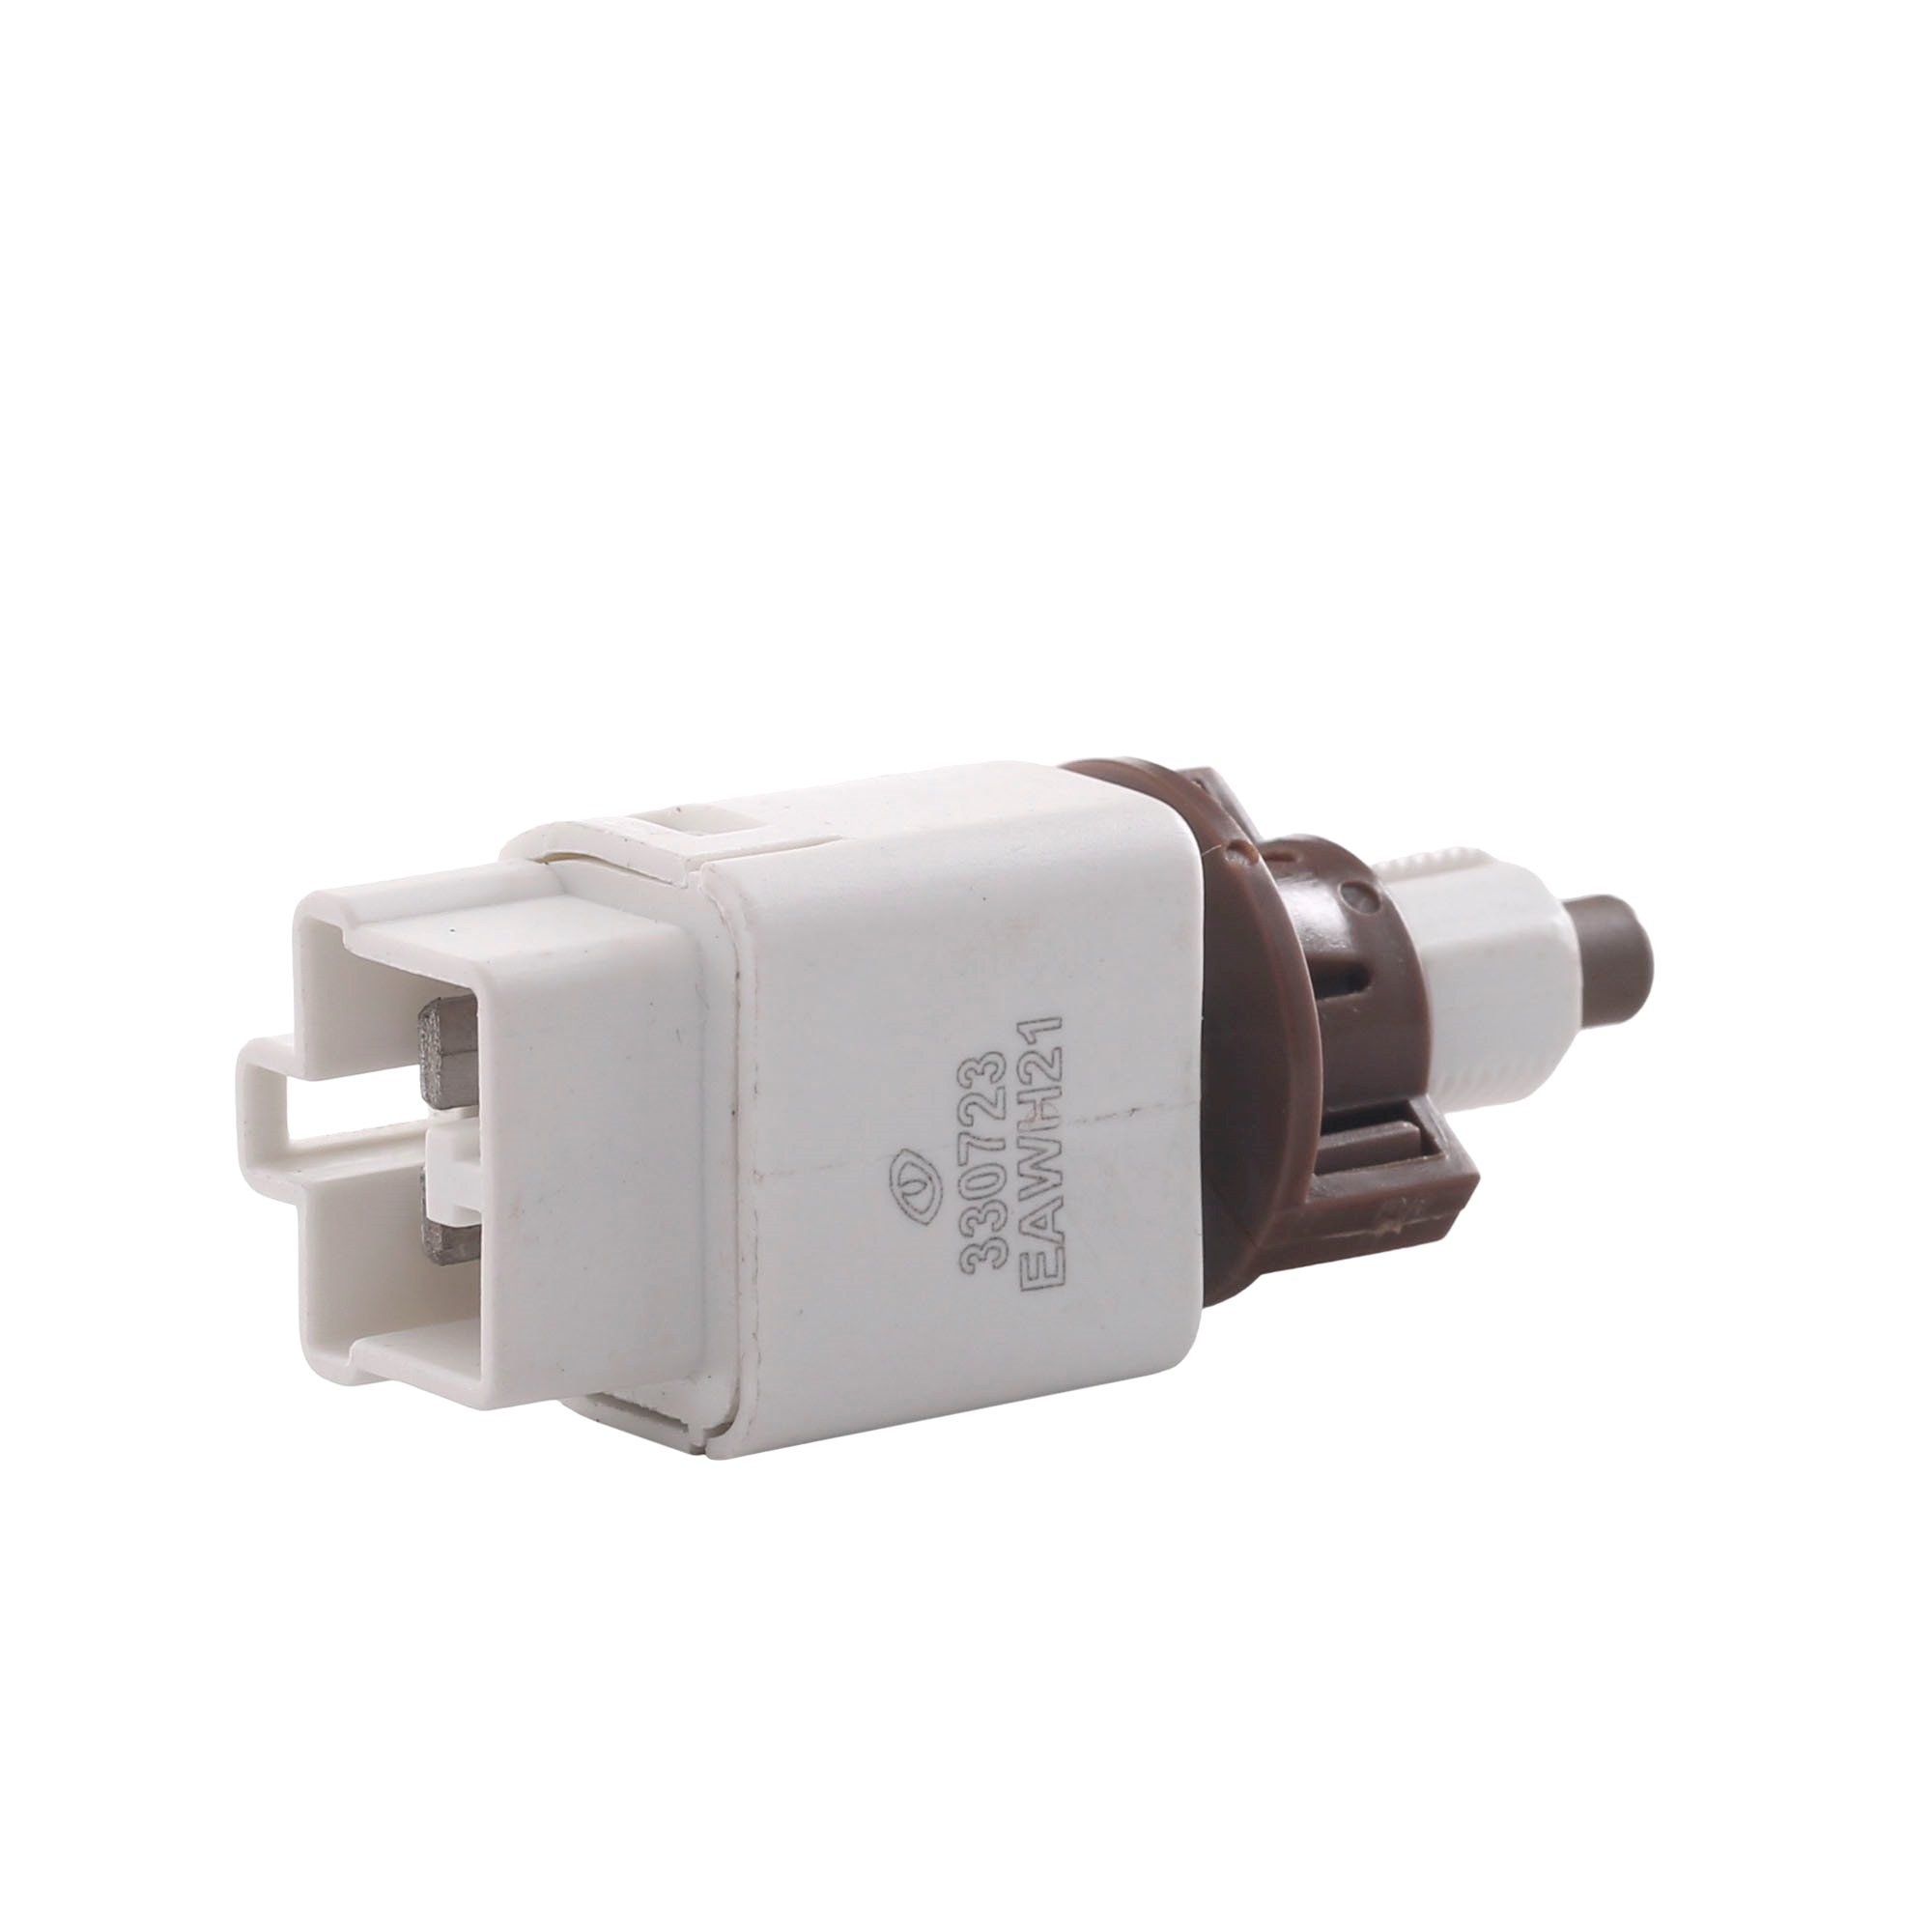 ERA Mechanical, 4-pin connector Number of pins: 4-pin connector Stop light switch 330723 buy